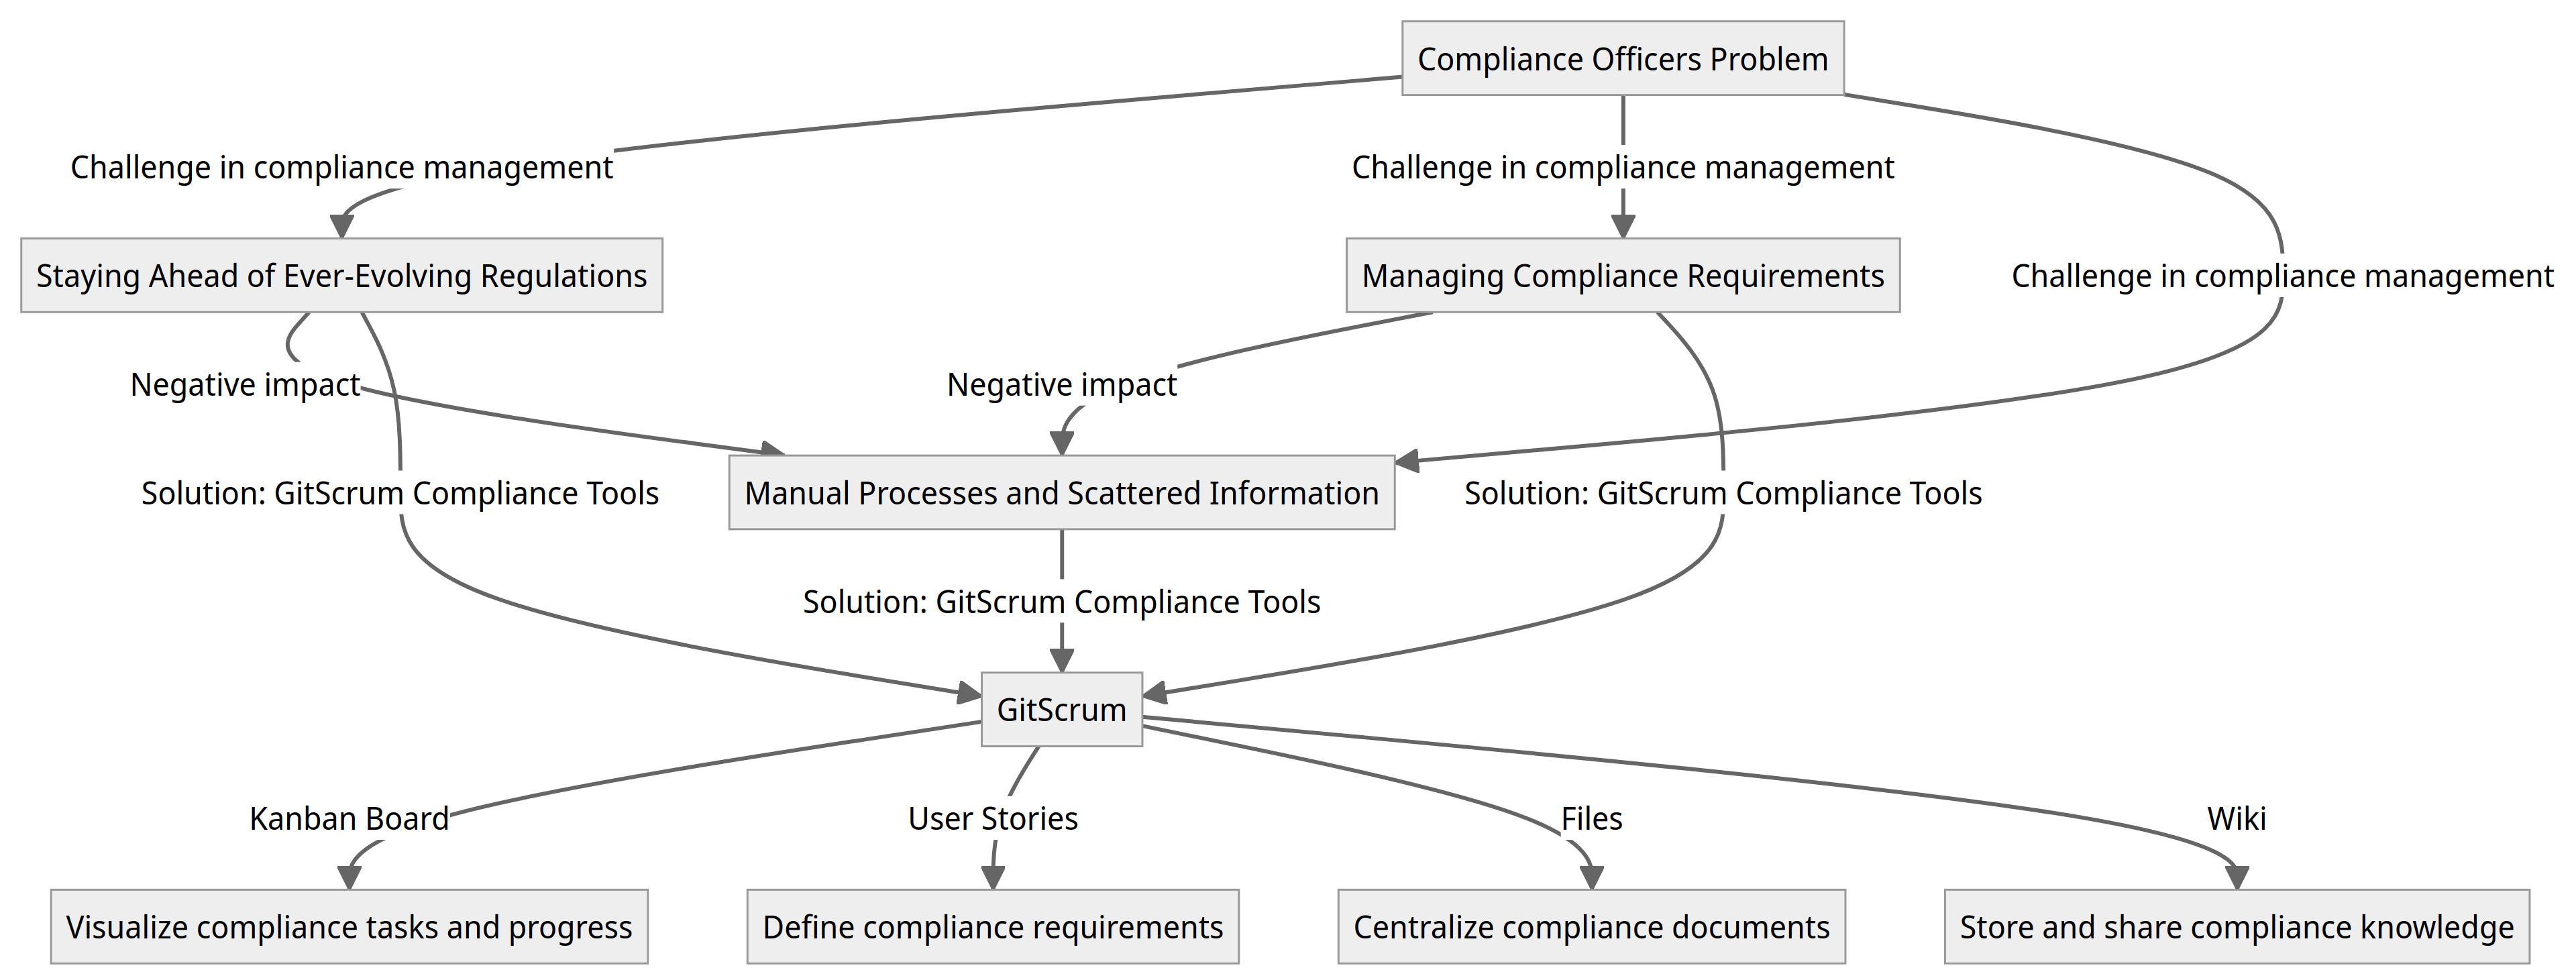 Diagram - Compliance Officers